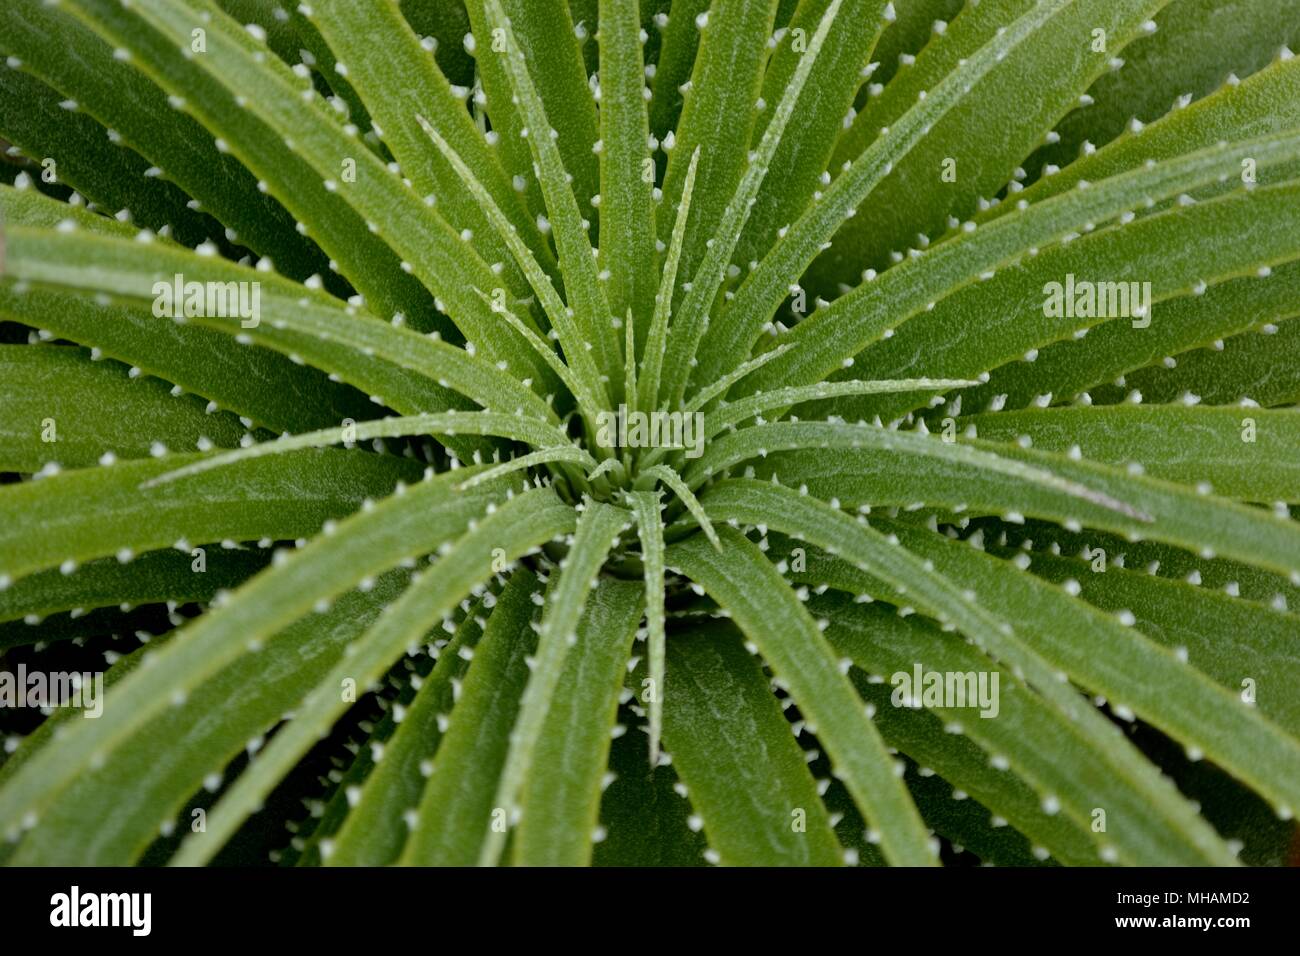 A close up image of a hechtia argentia cactus Stock Photo